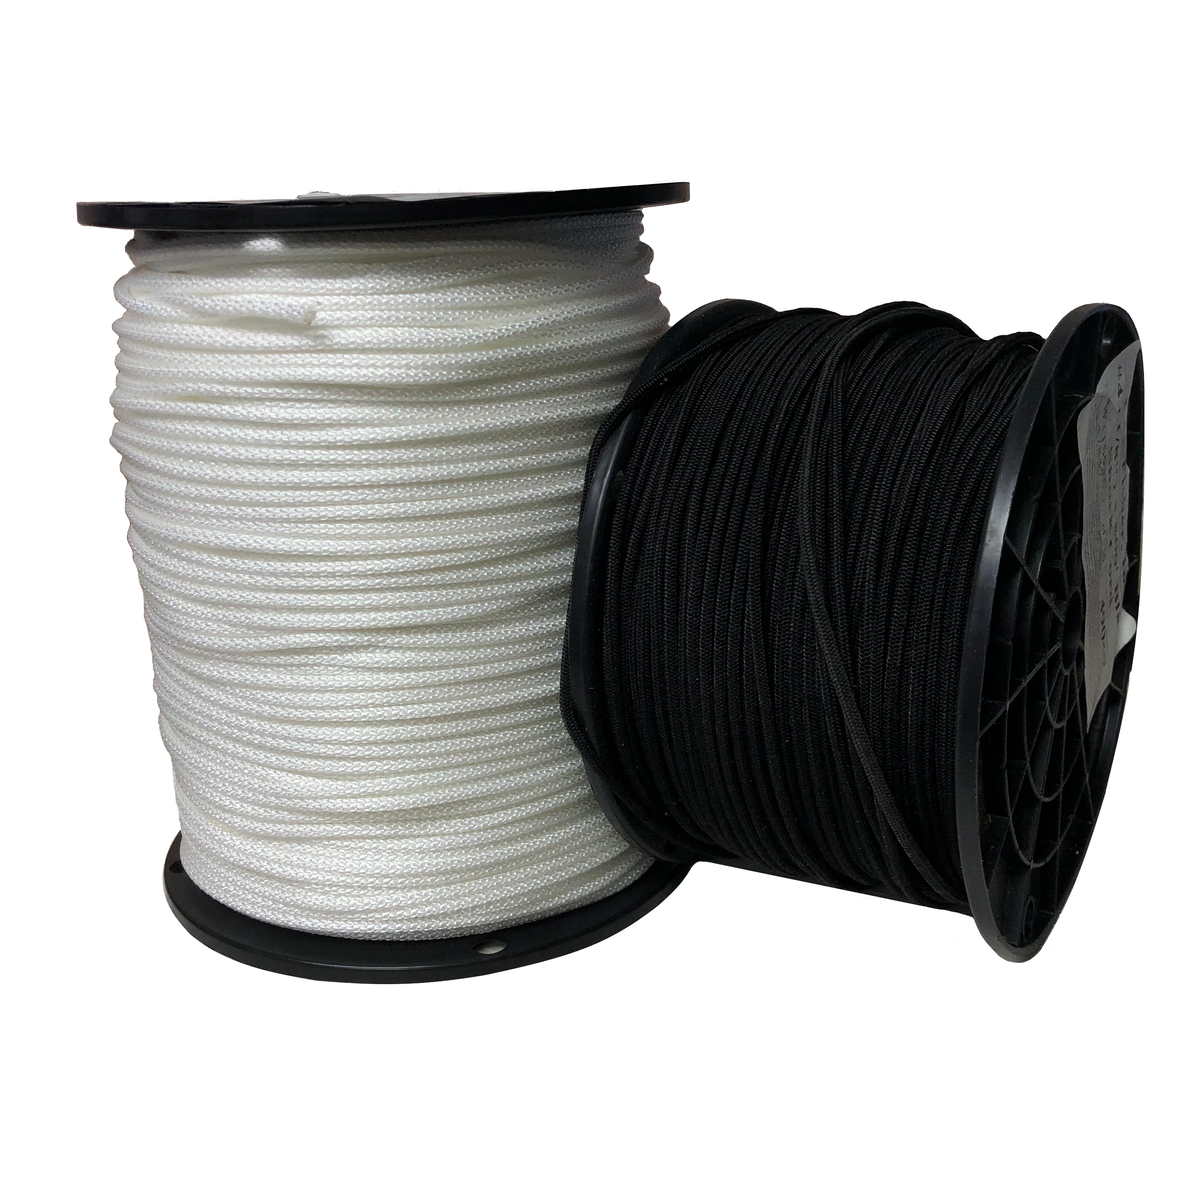 Stringline Polyester Cord Wire Core, 5000 Feet on Spool for Concrete  Stringline Projects - Hogan Co